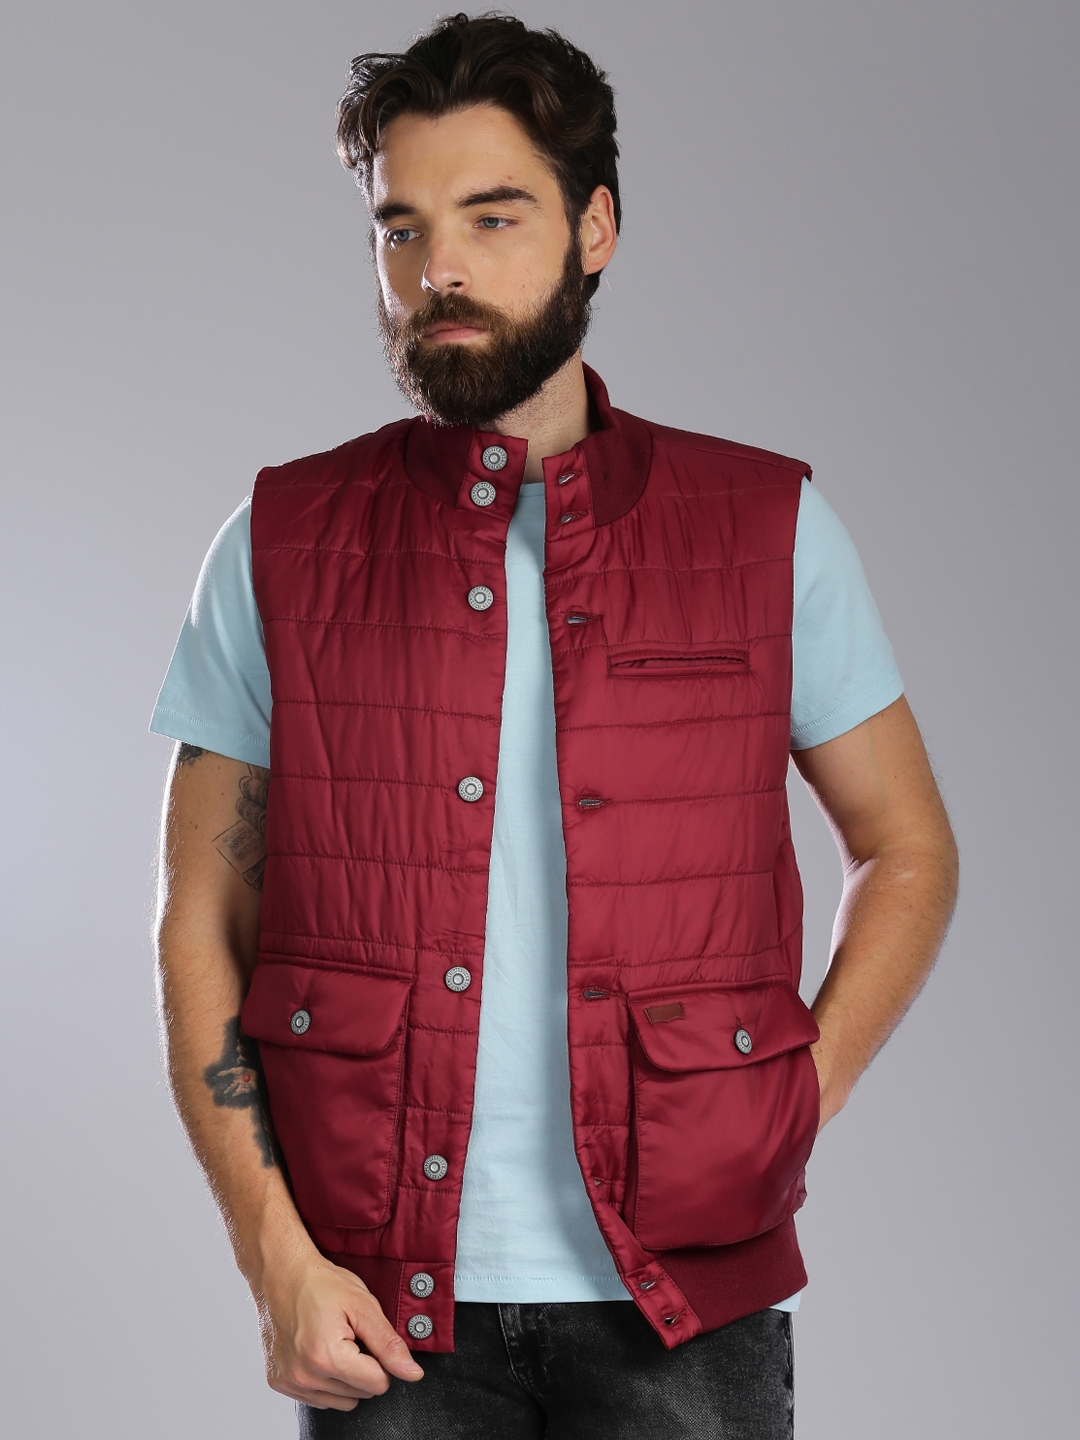 Buy Levis Red Sleeveless Puffer Jacket - Jackets for Men 1460561 | Myntra